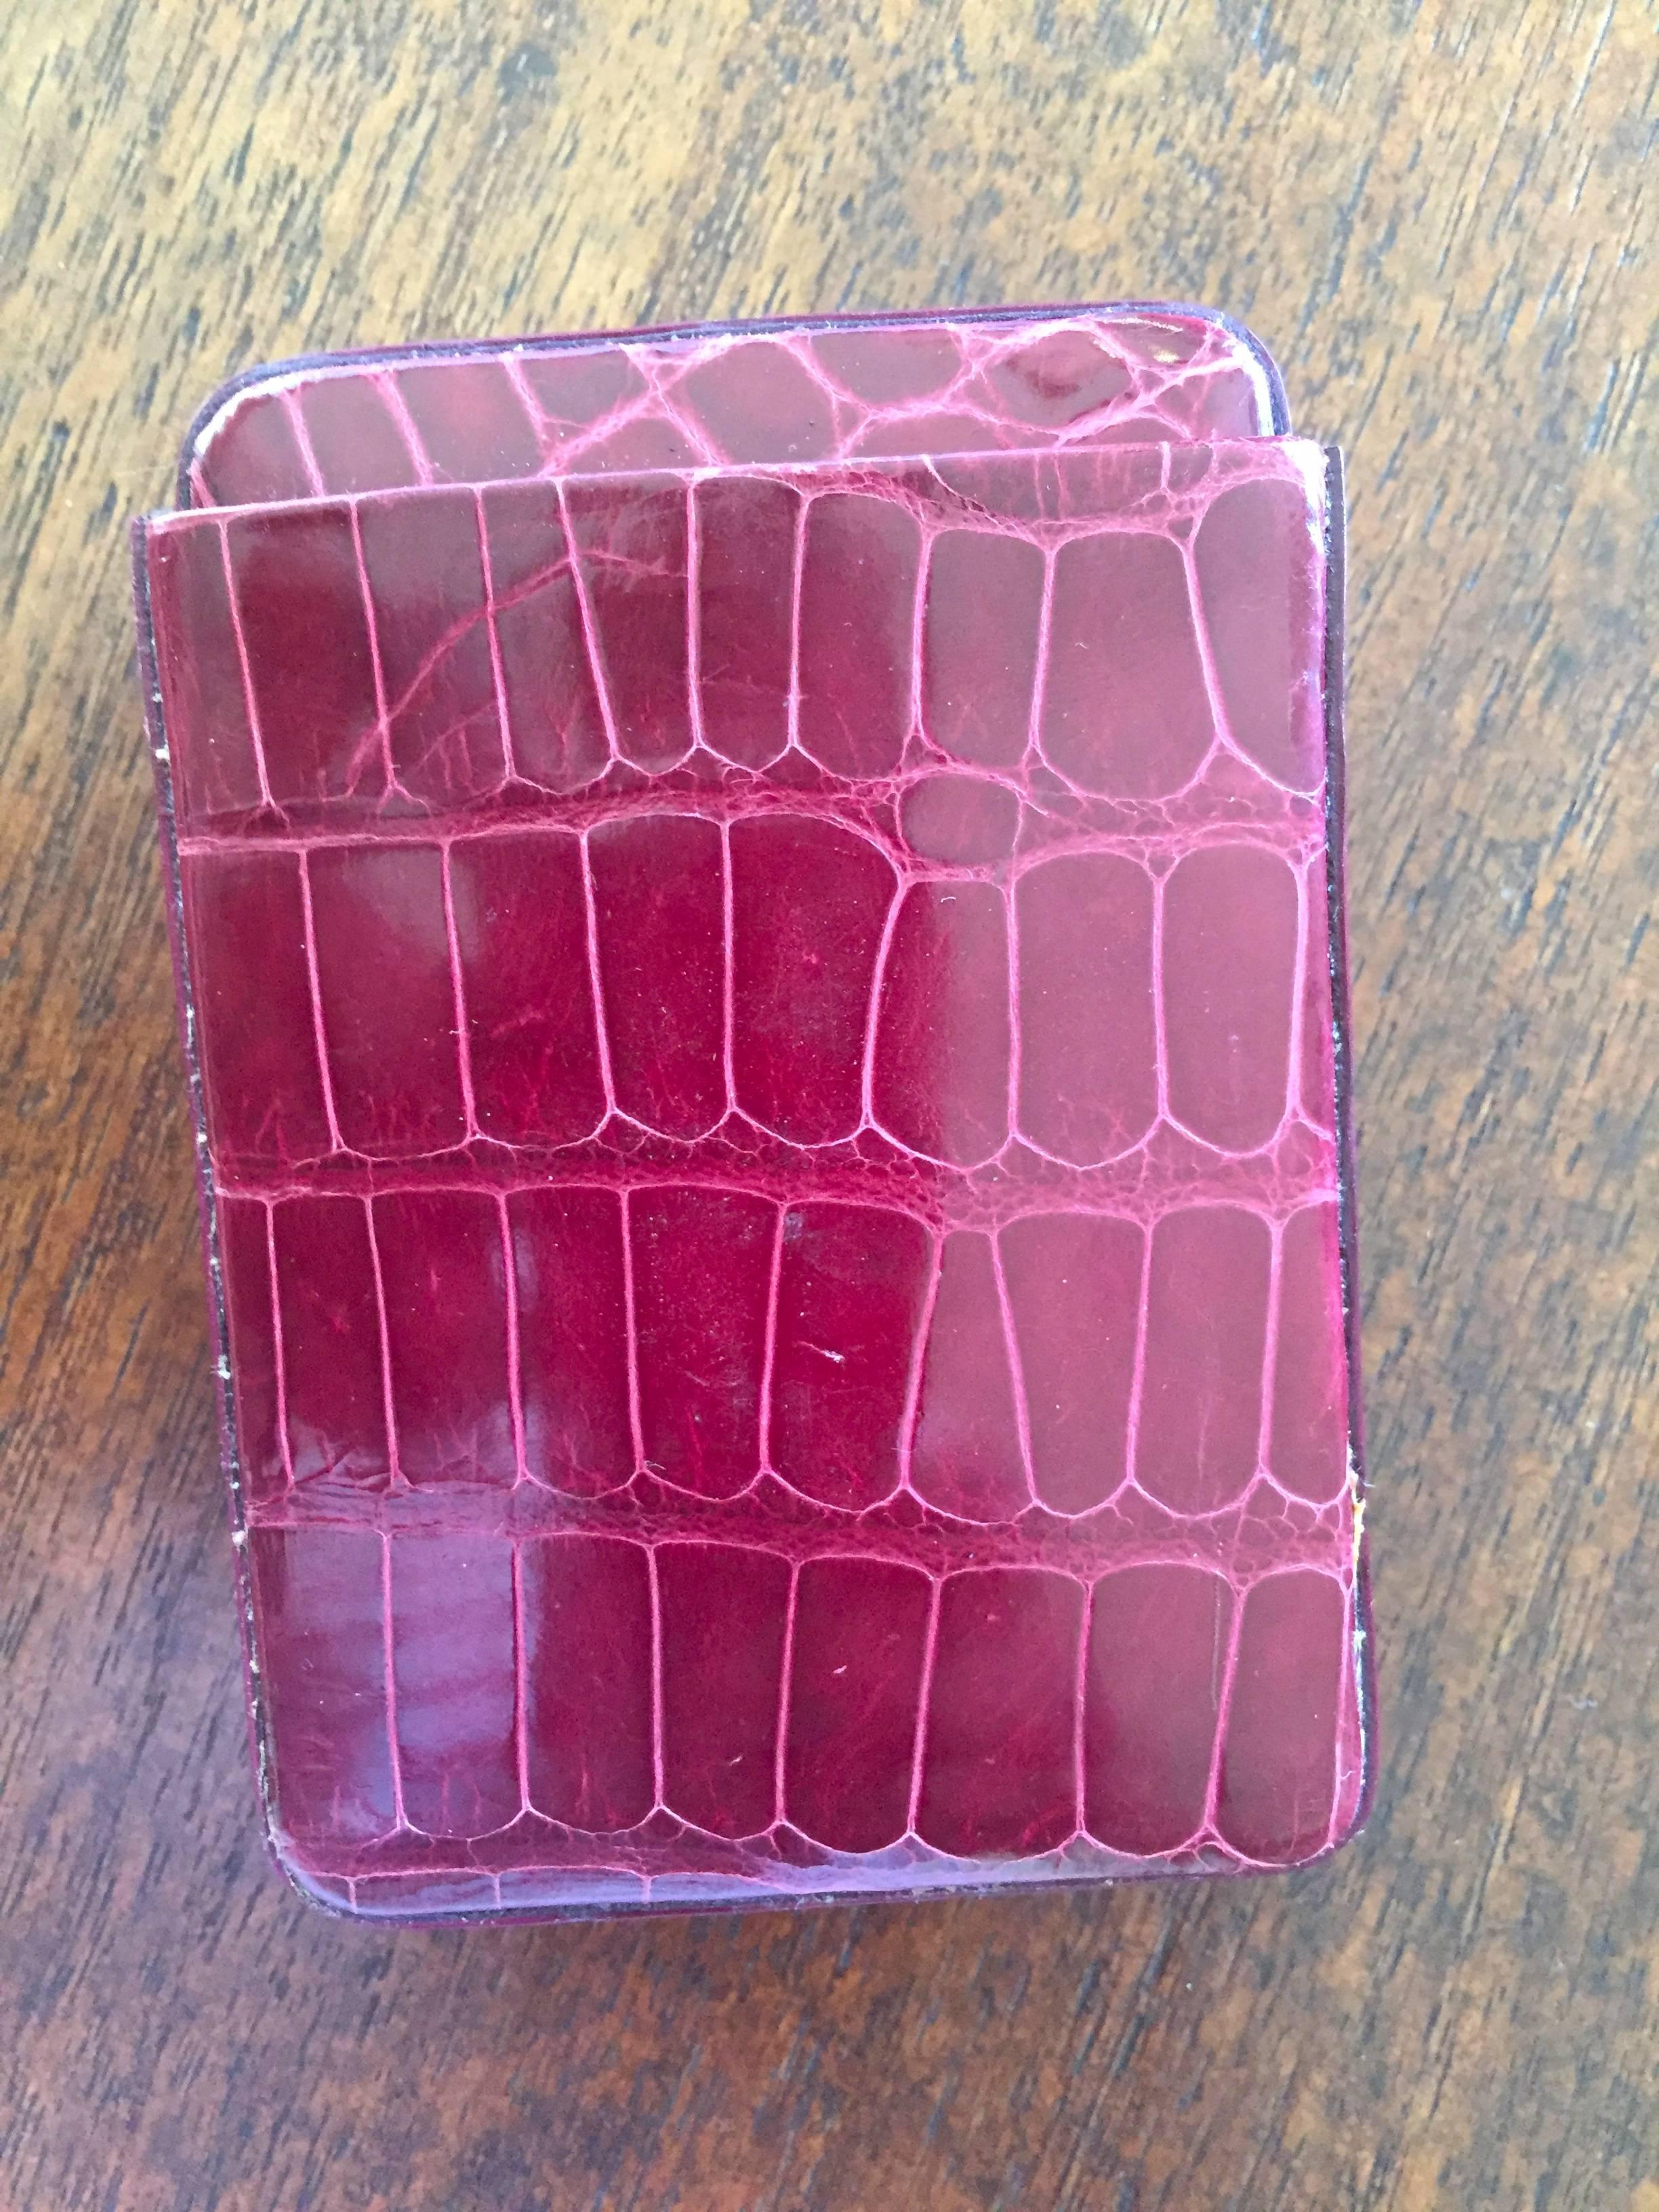 Beautiful deep red genuine alligator cigarette case from Tom Ford era Gucci.
Holds 6 cigarettes, not a box.
In Excellent condition